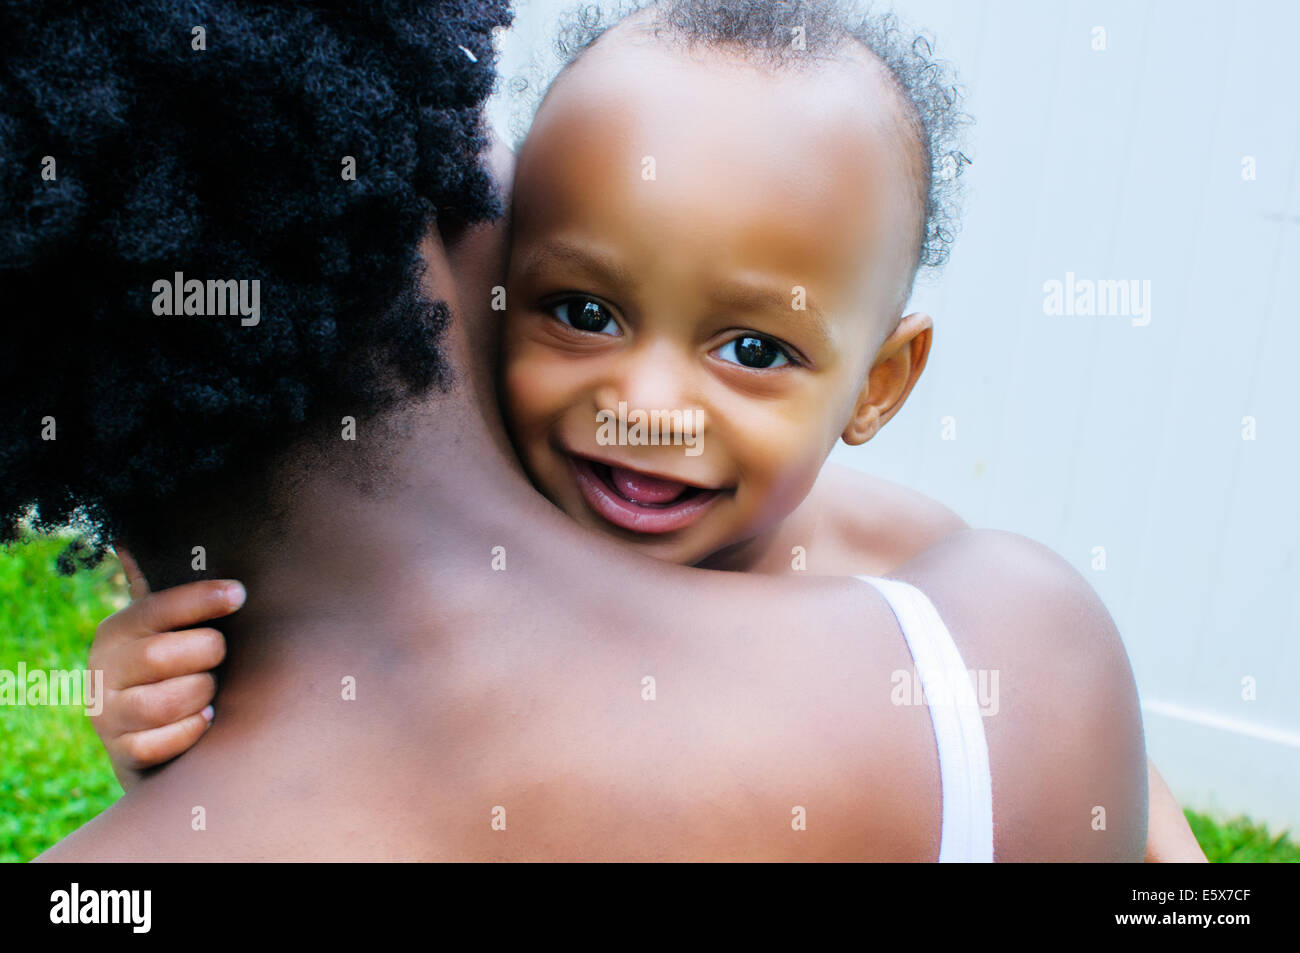 Close up portrait of baby boy looking over mother's shoulder Stock Photo